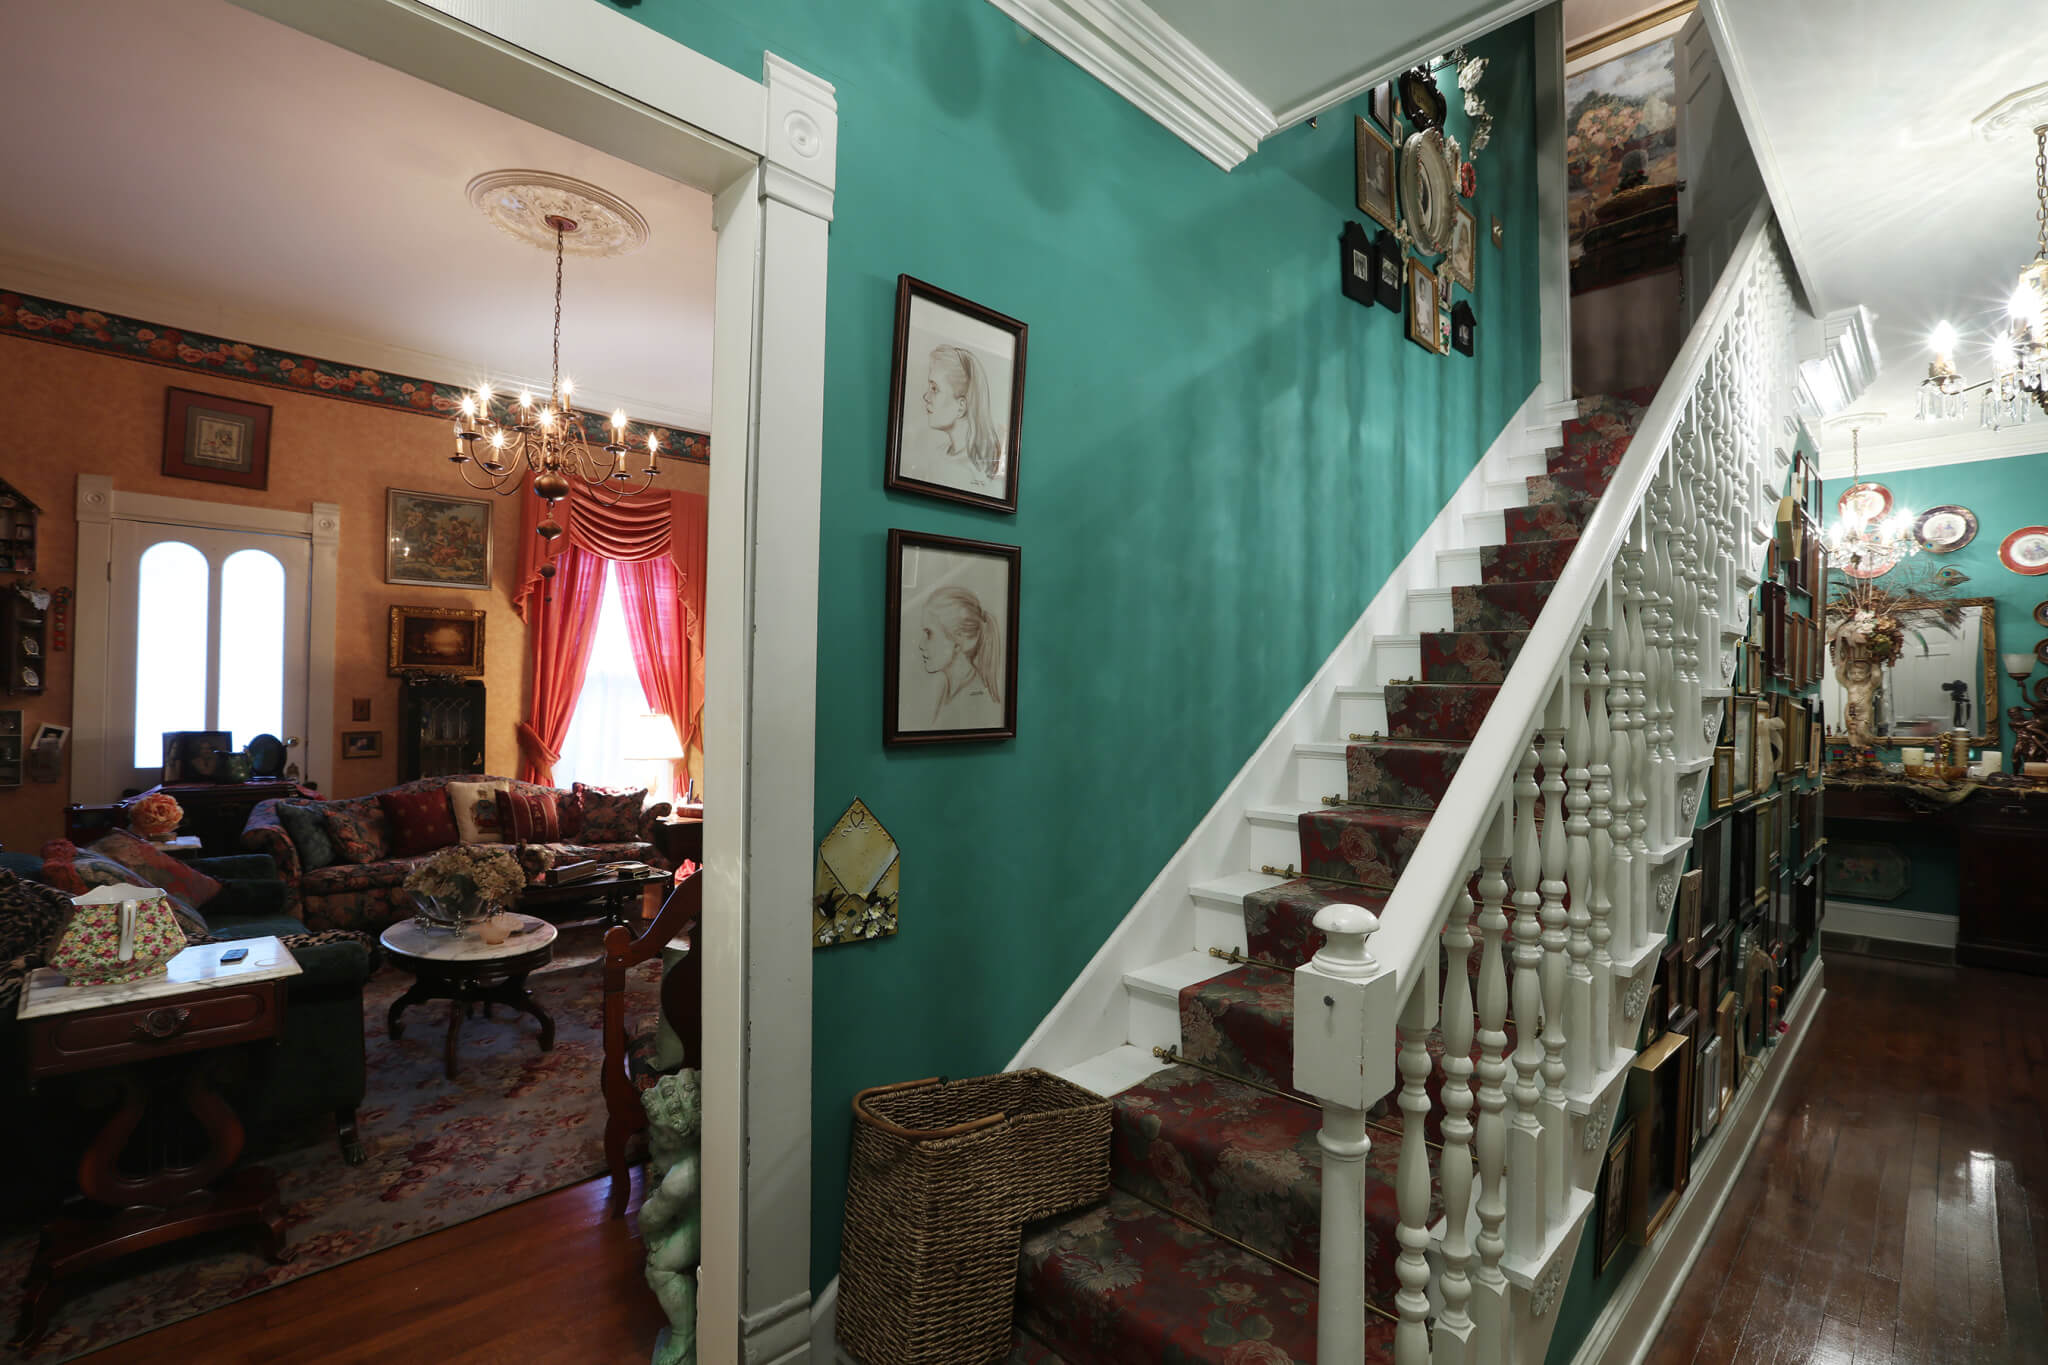 Stairs leading upstairs against a green wall and Living Room on the left side